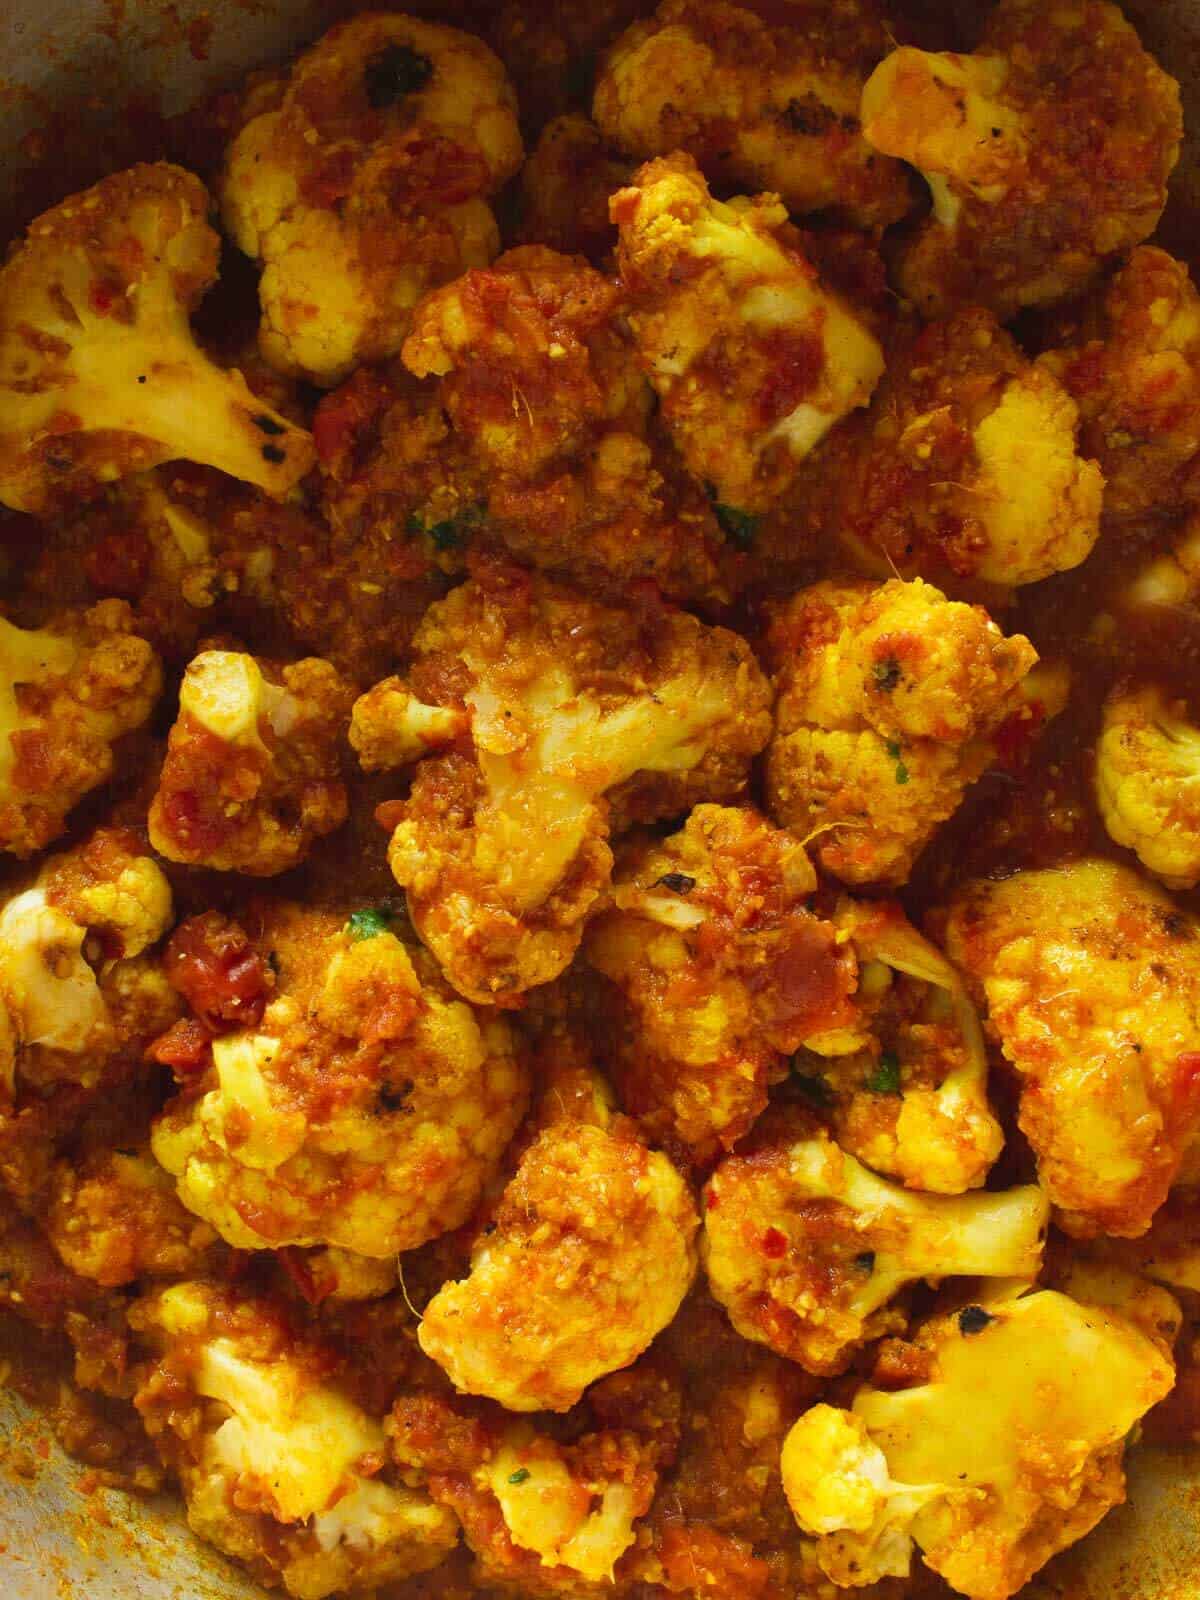 combine all of the ingredients of the curried cauliflower.